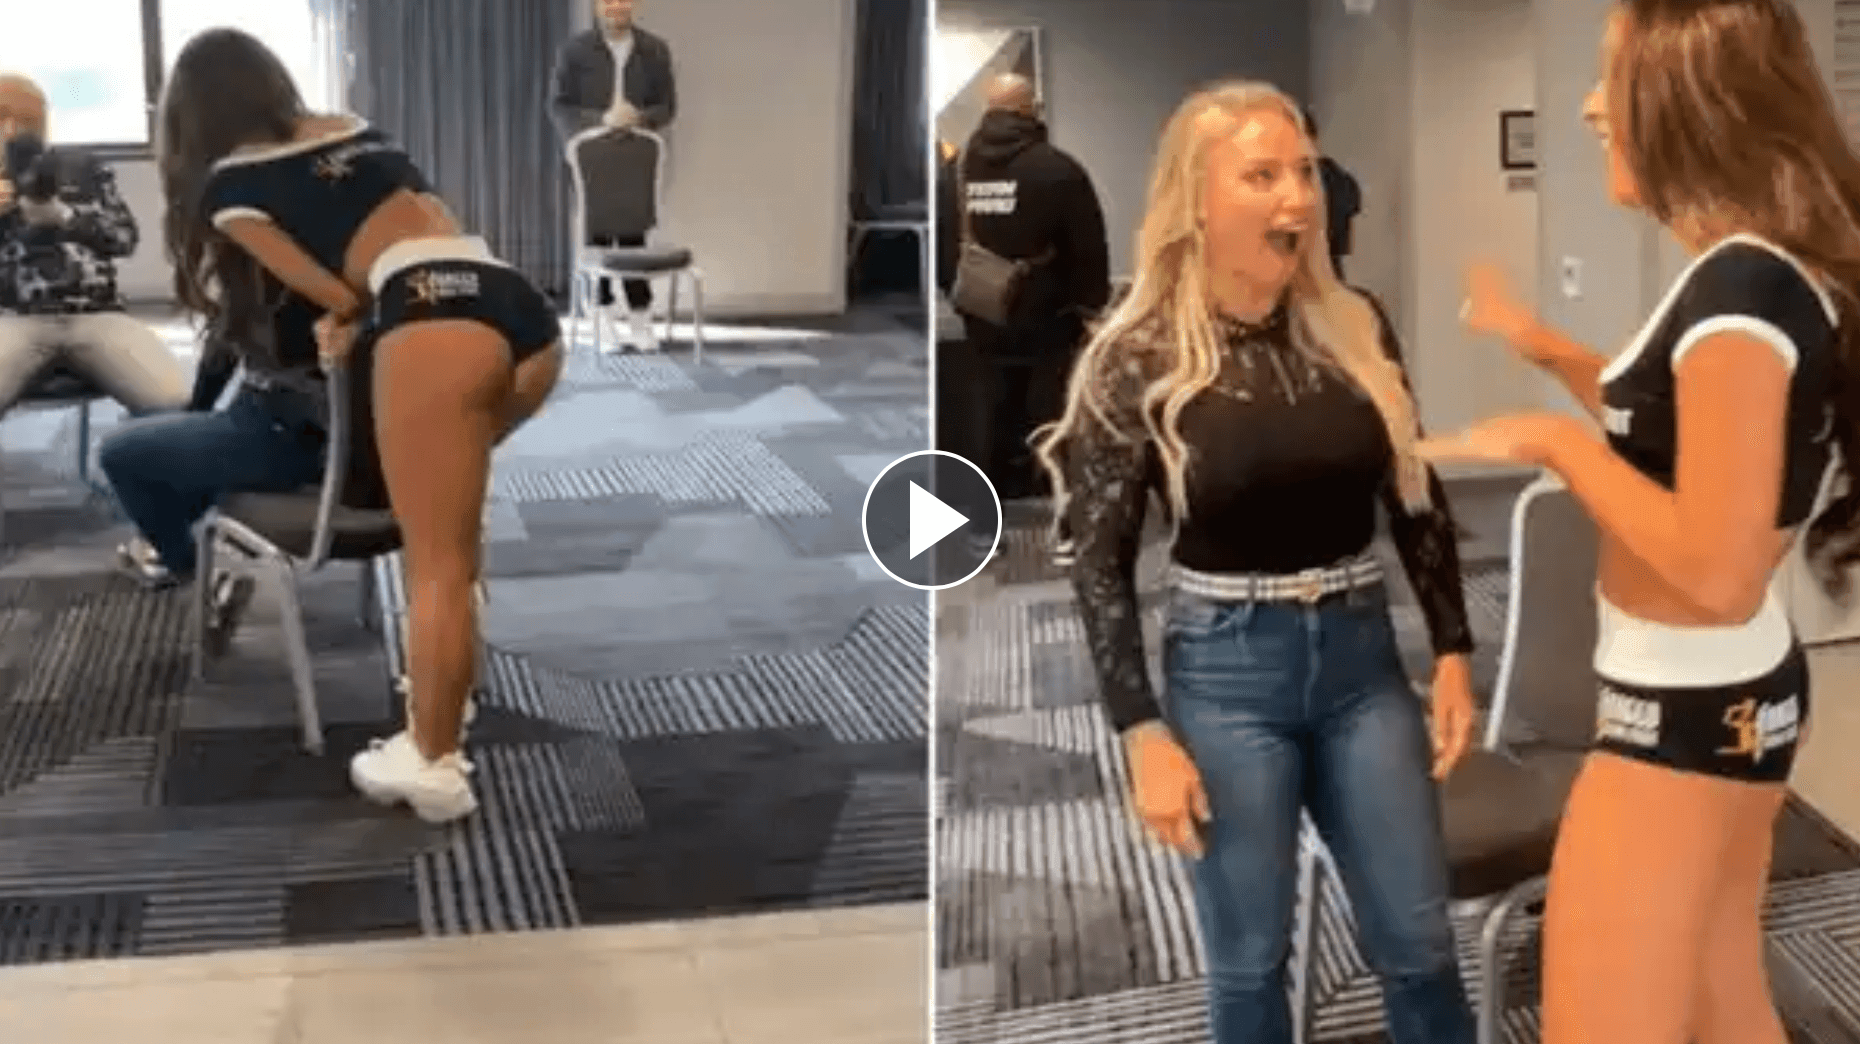 GIRL POWER Conor McGregor secretly flies Anthony Joshua ring girl out to San Francisco to surprise Ebanie Bridges before fight